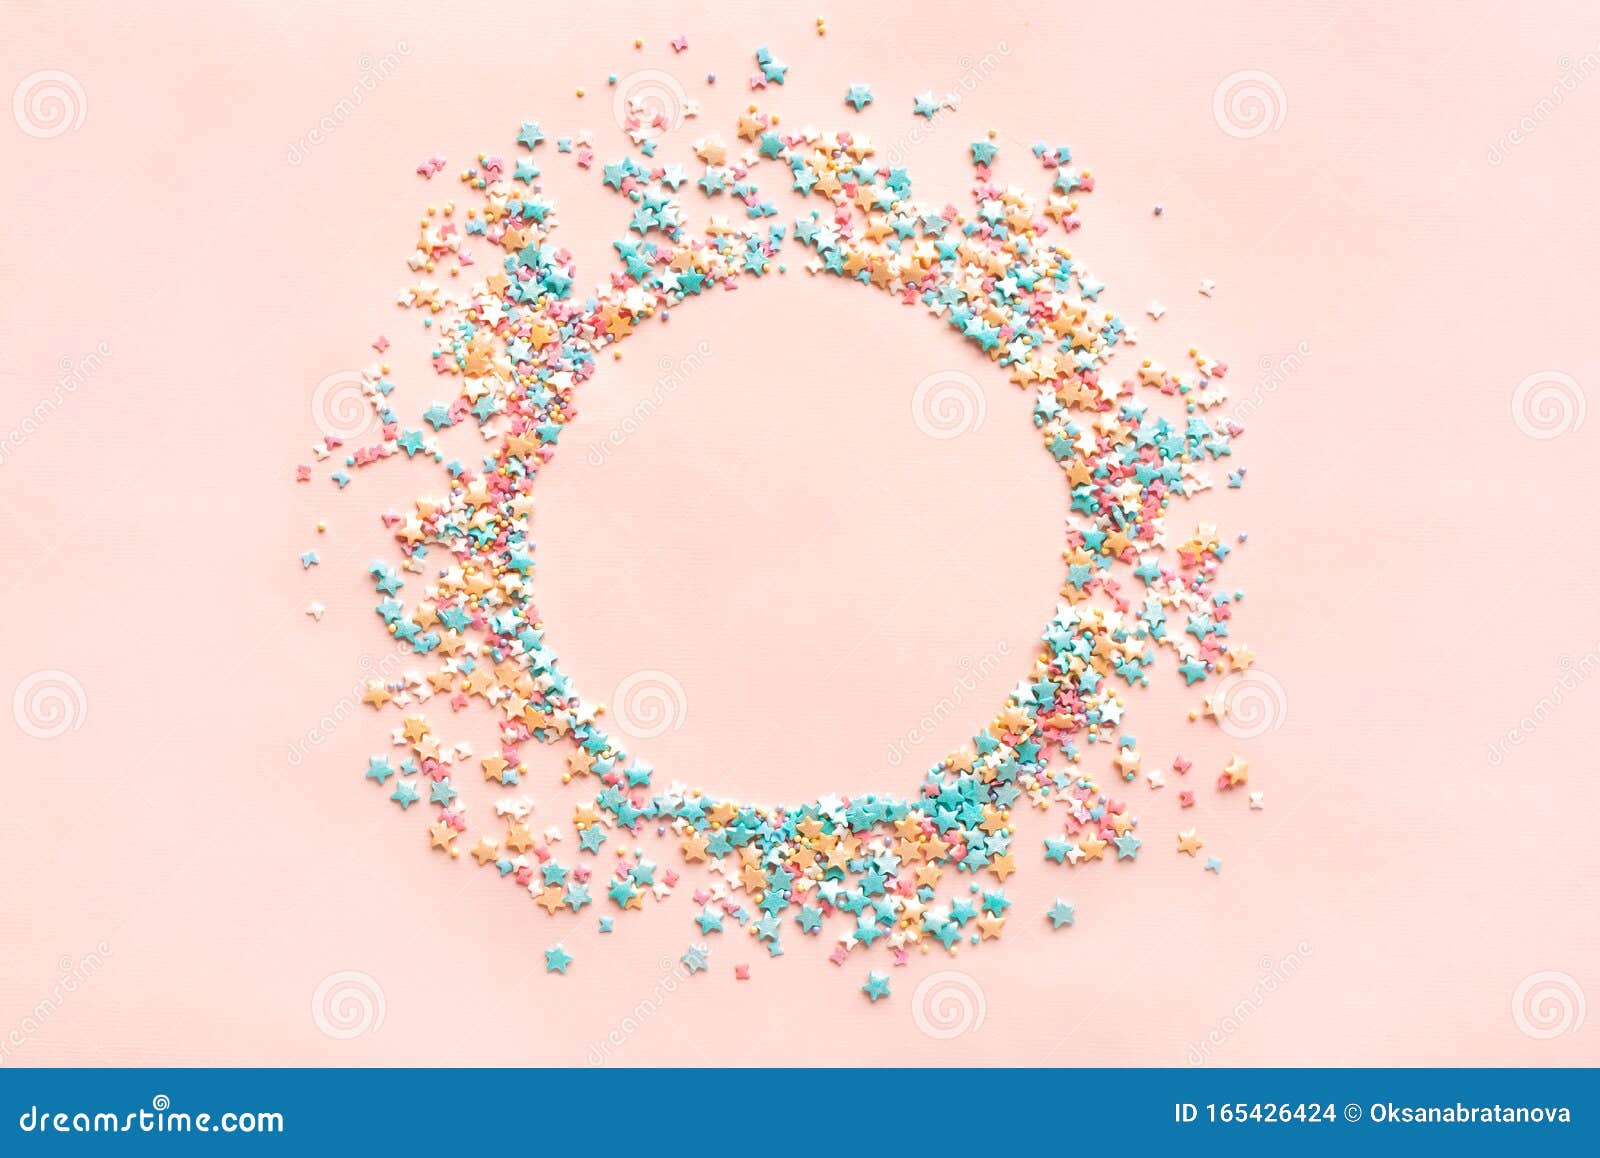 Colorful Sweet Sprinkles stock photo. Image of creative - 165426424